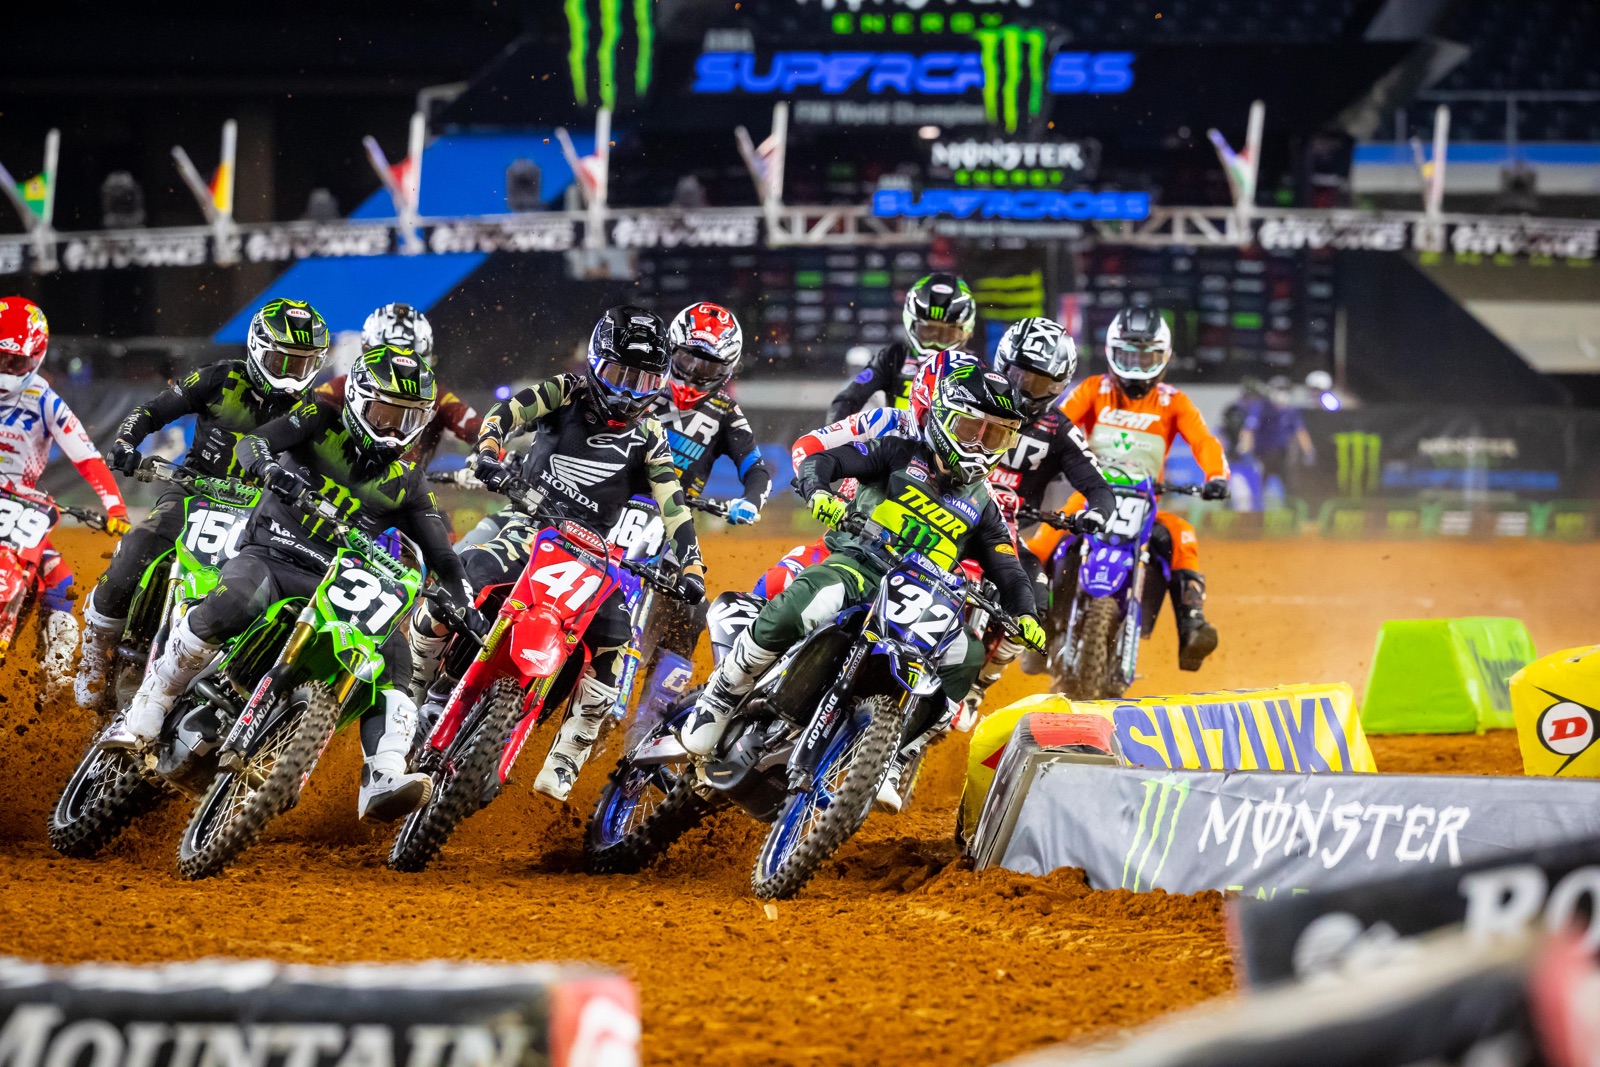 Justin Cooper got the holeshot and was unchallenged 